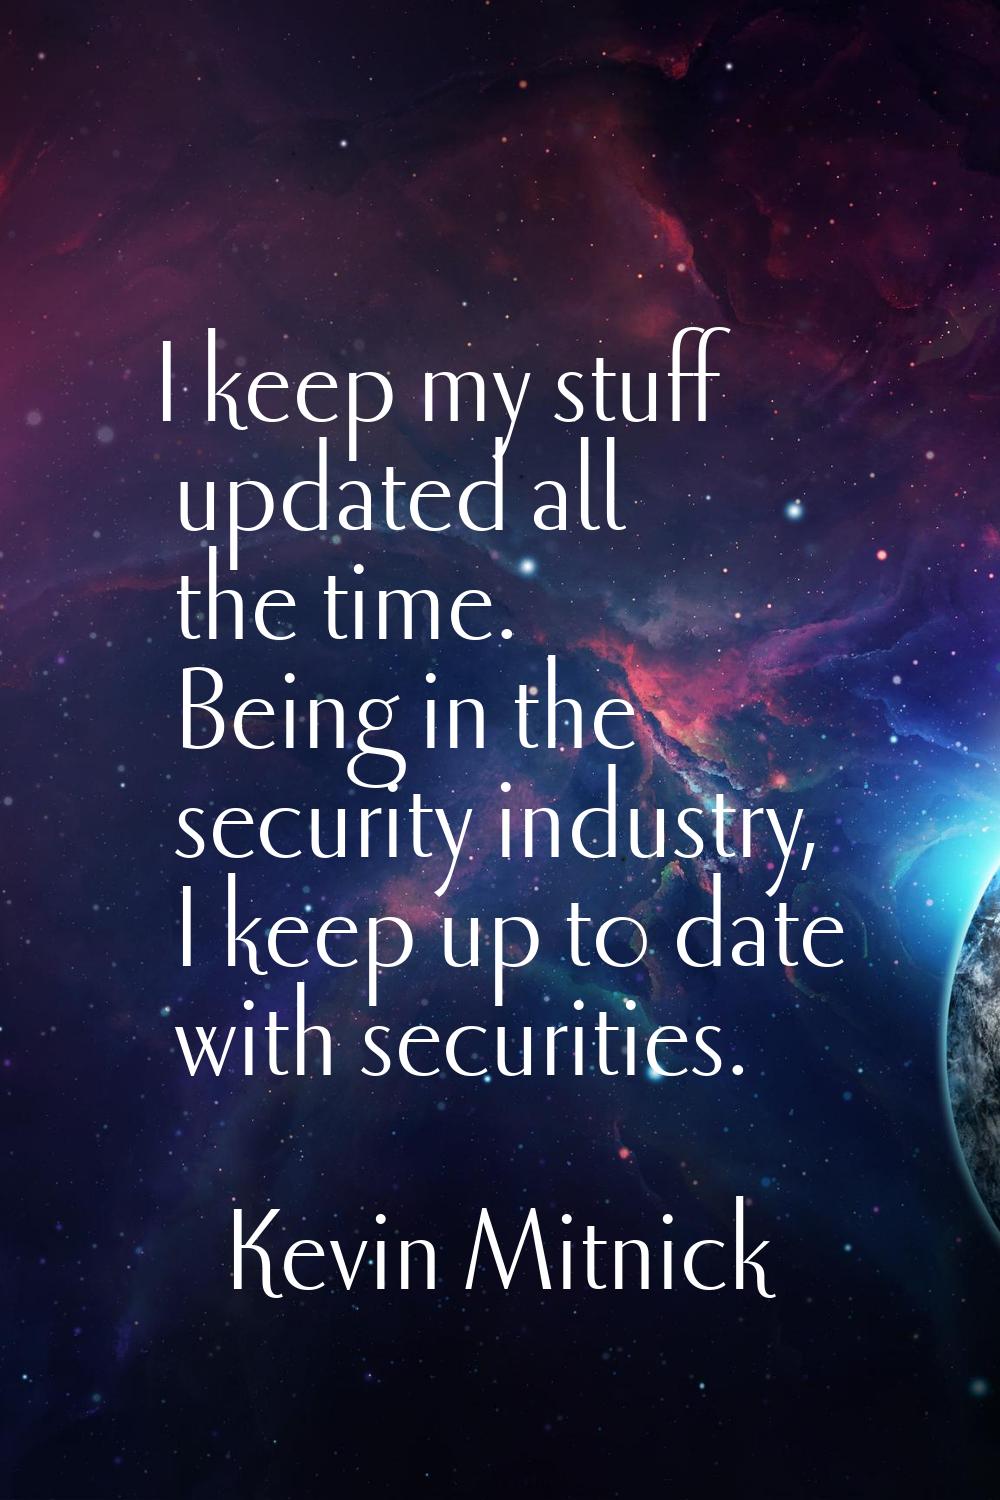 I keep my stuff updated all the time. Being in the security industry, I keep up to date with securi